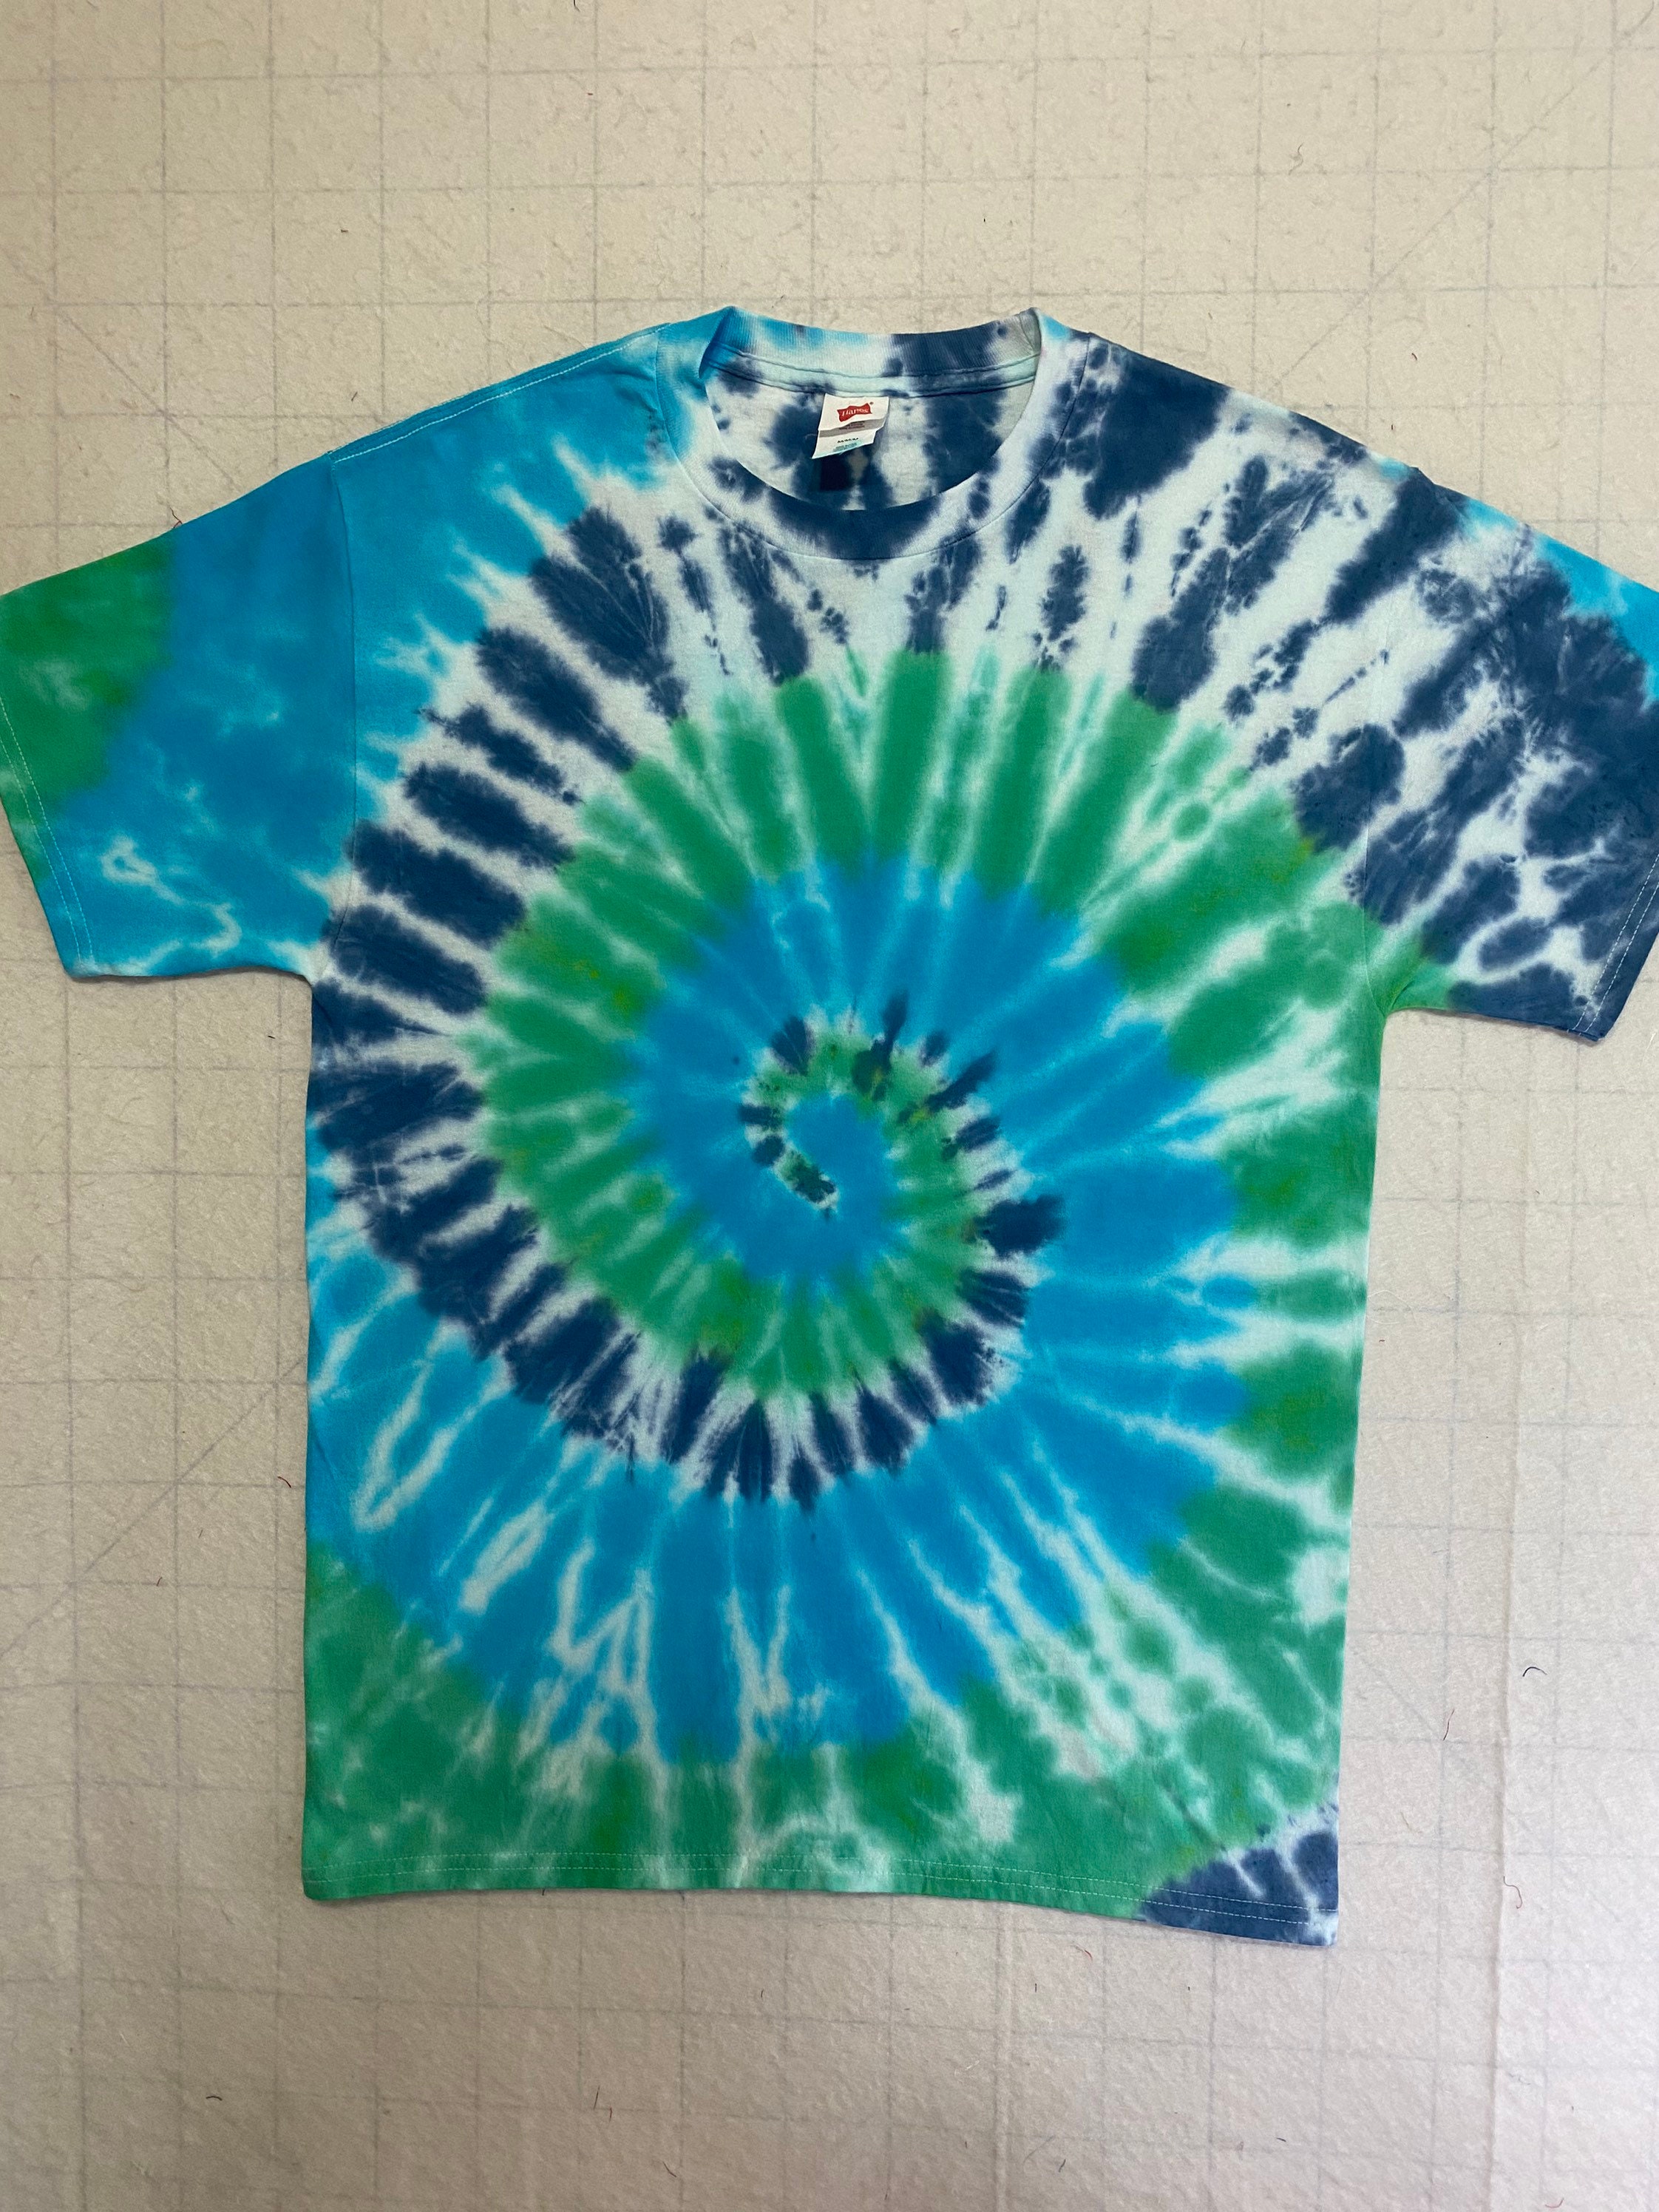 Forest Swirl Tie Dye Unisex Shirt Hand Dyed Green And Blue | Etsy